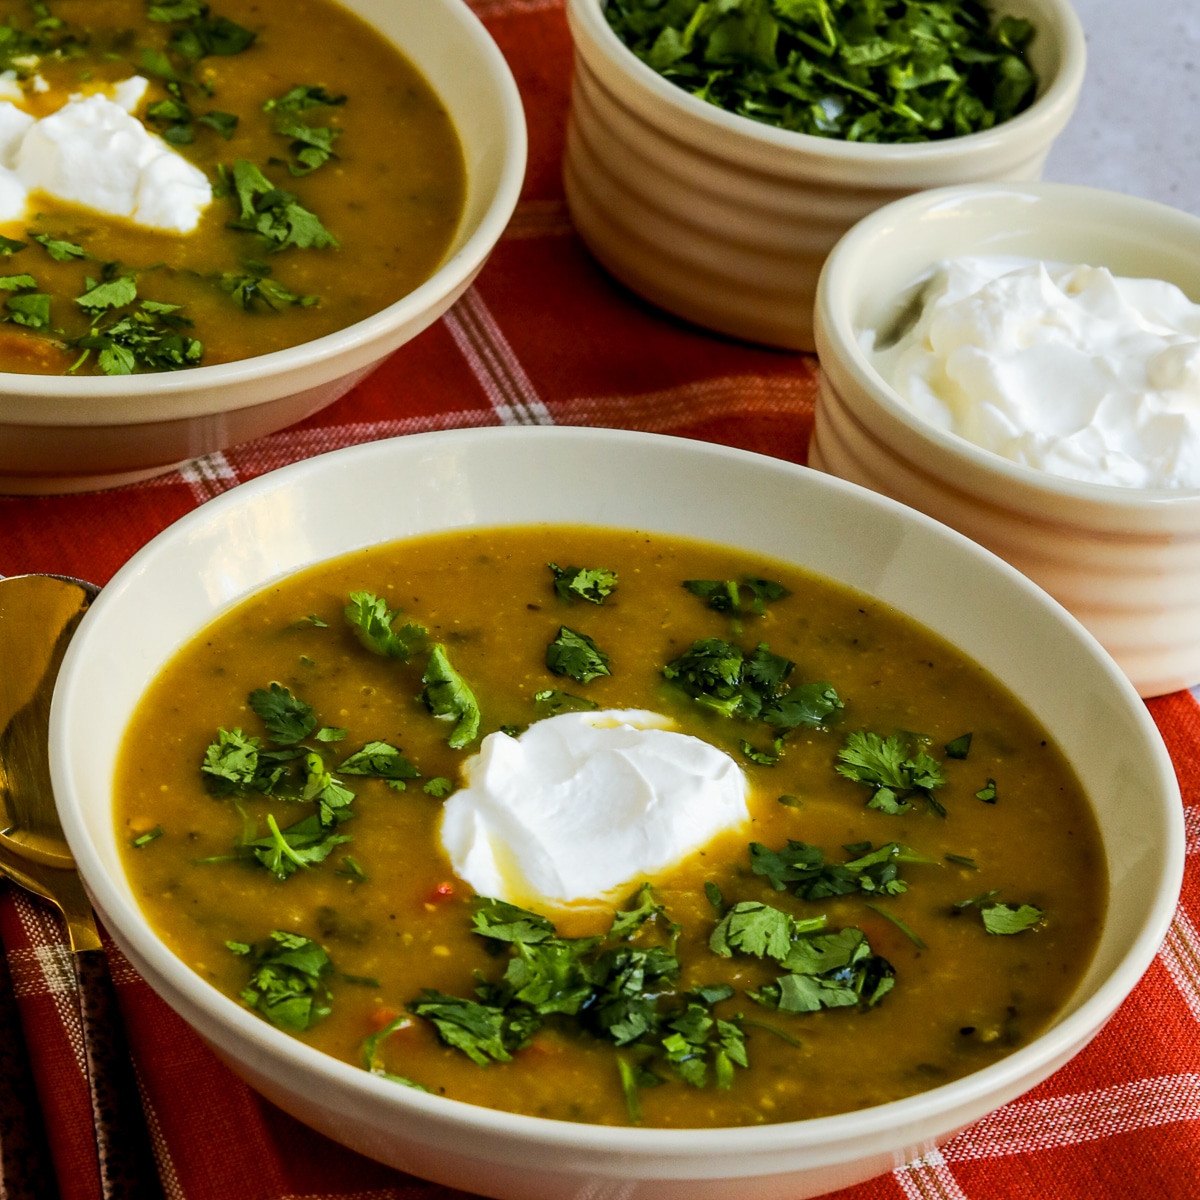 Square image for Butternut Squash and Black Bean Soup shown in two bowls.